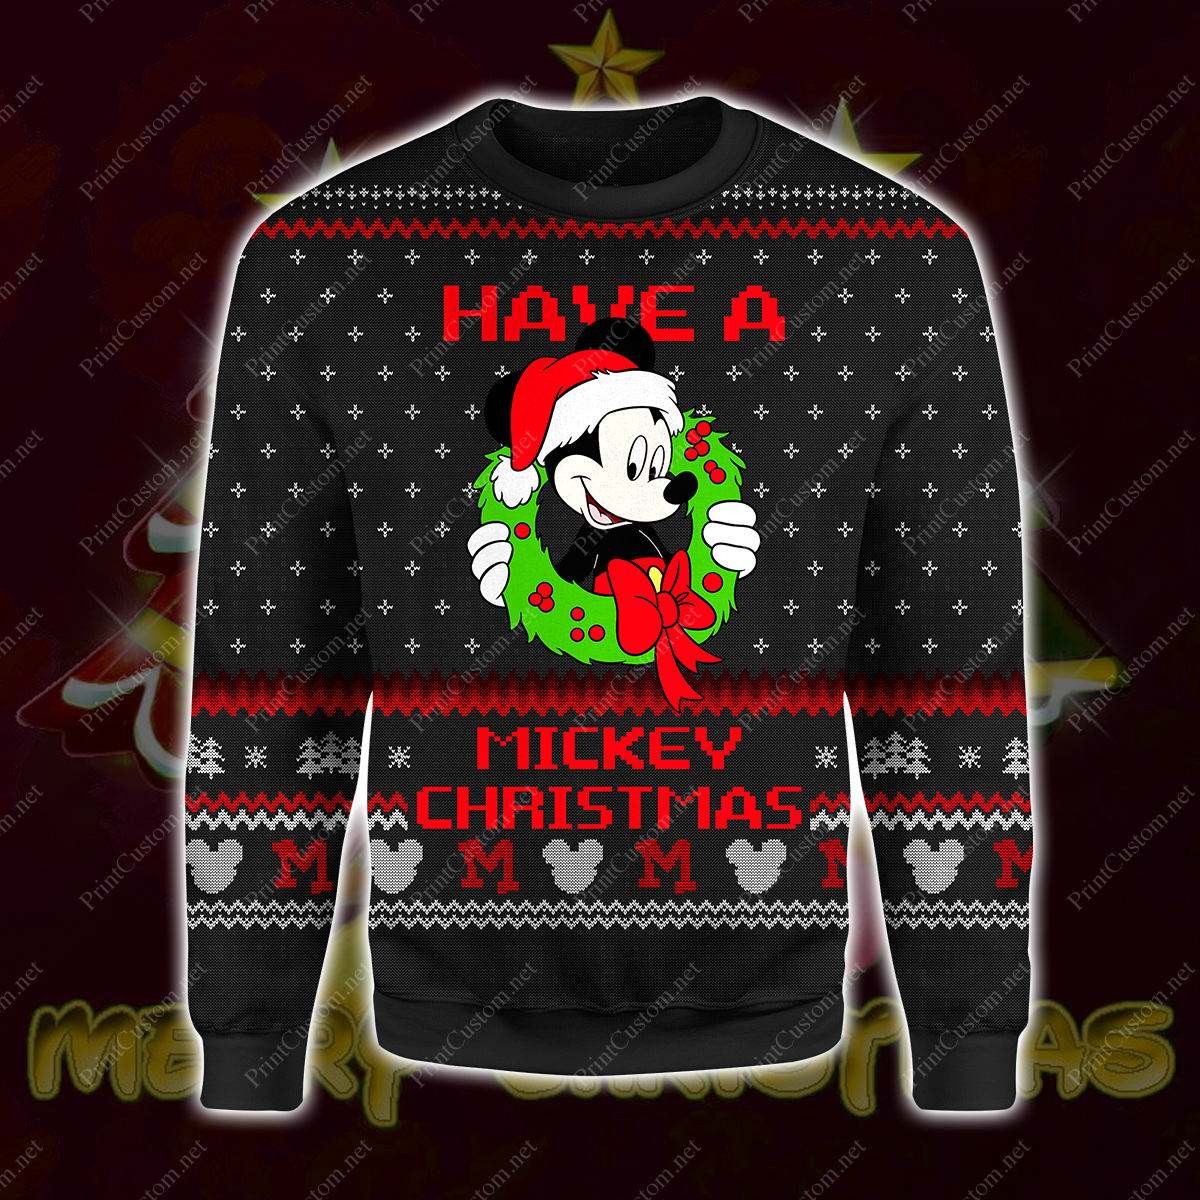 Have a mickey christmas full printing ugly christmas sweater 2